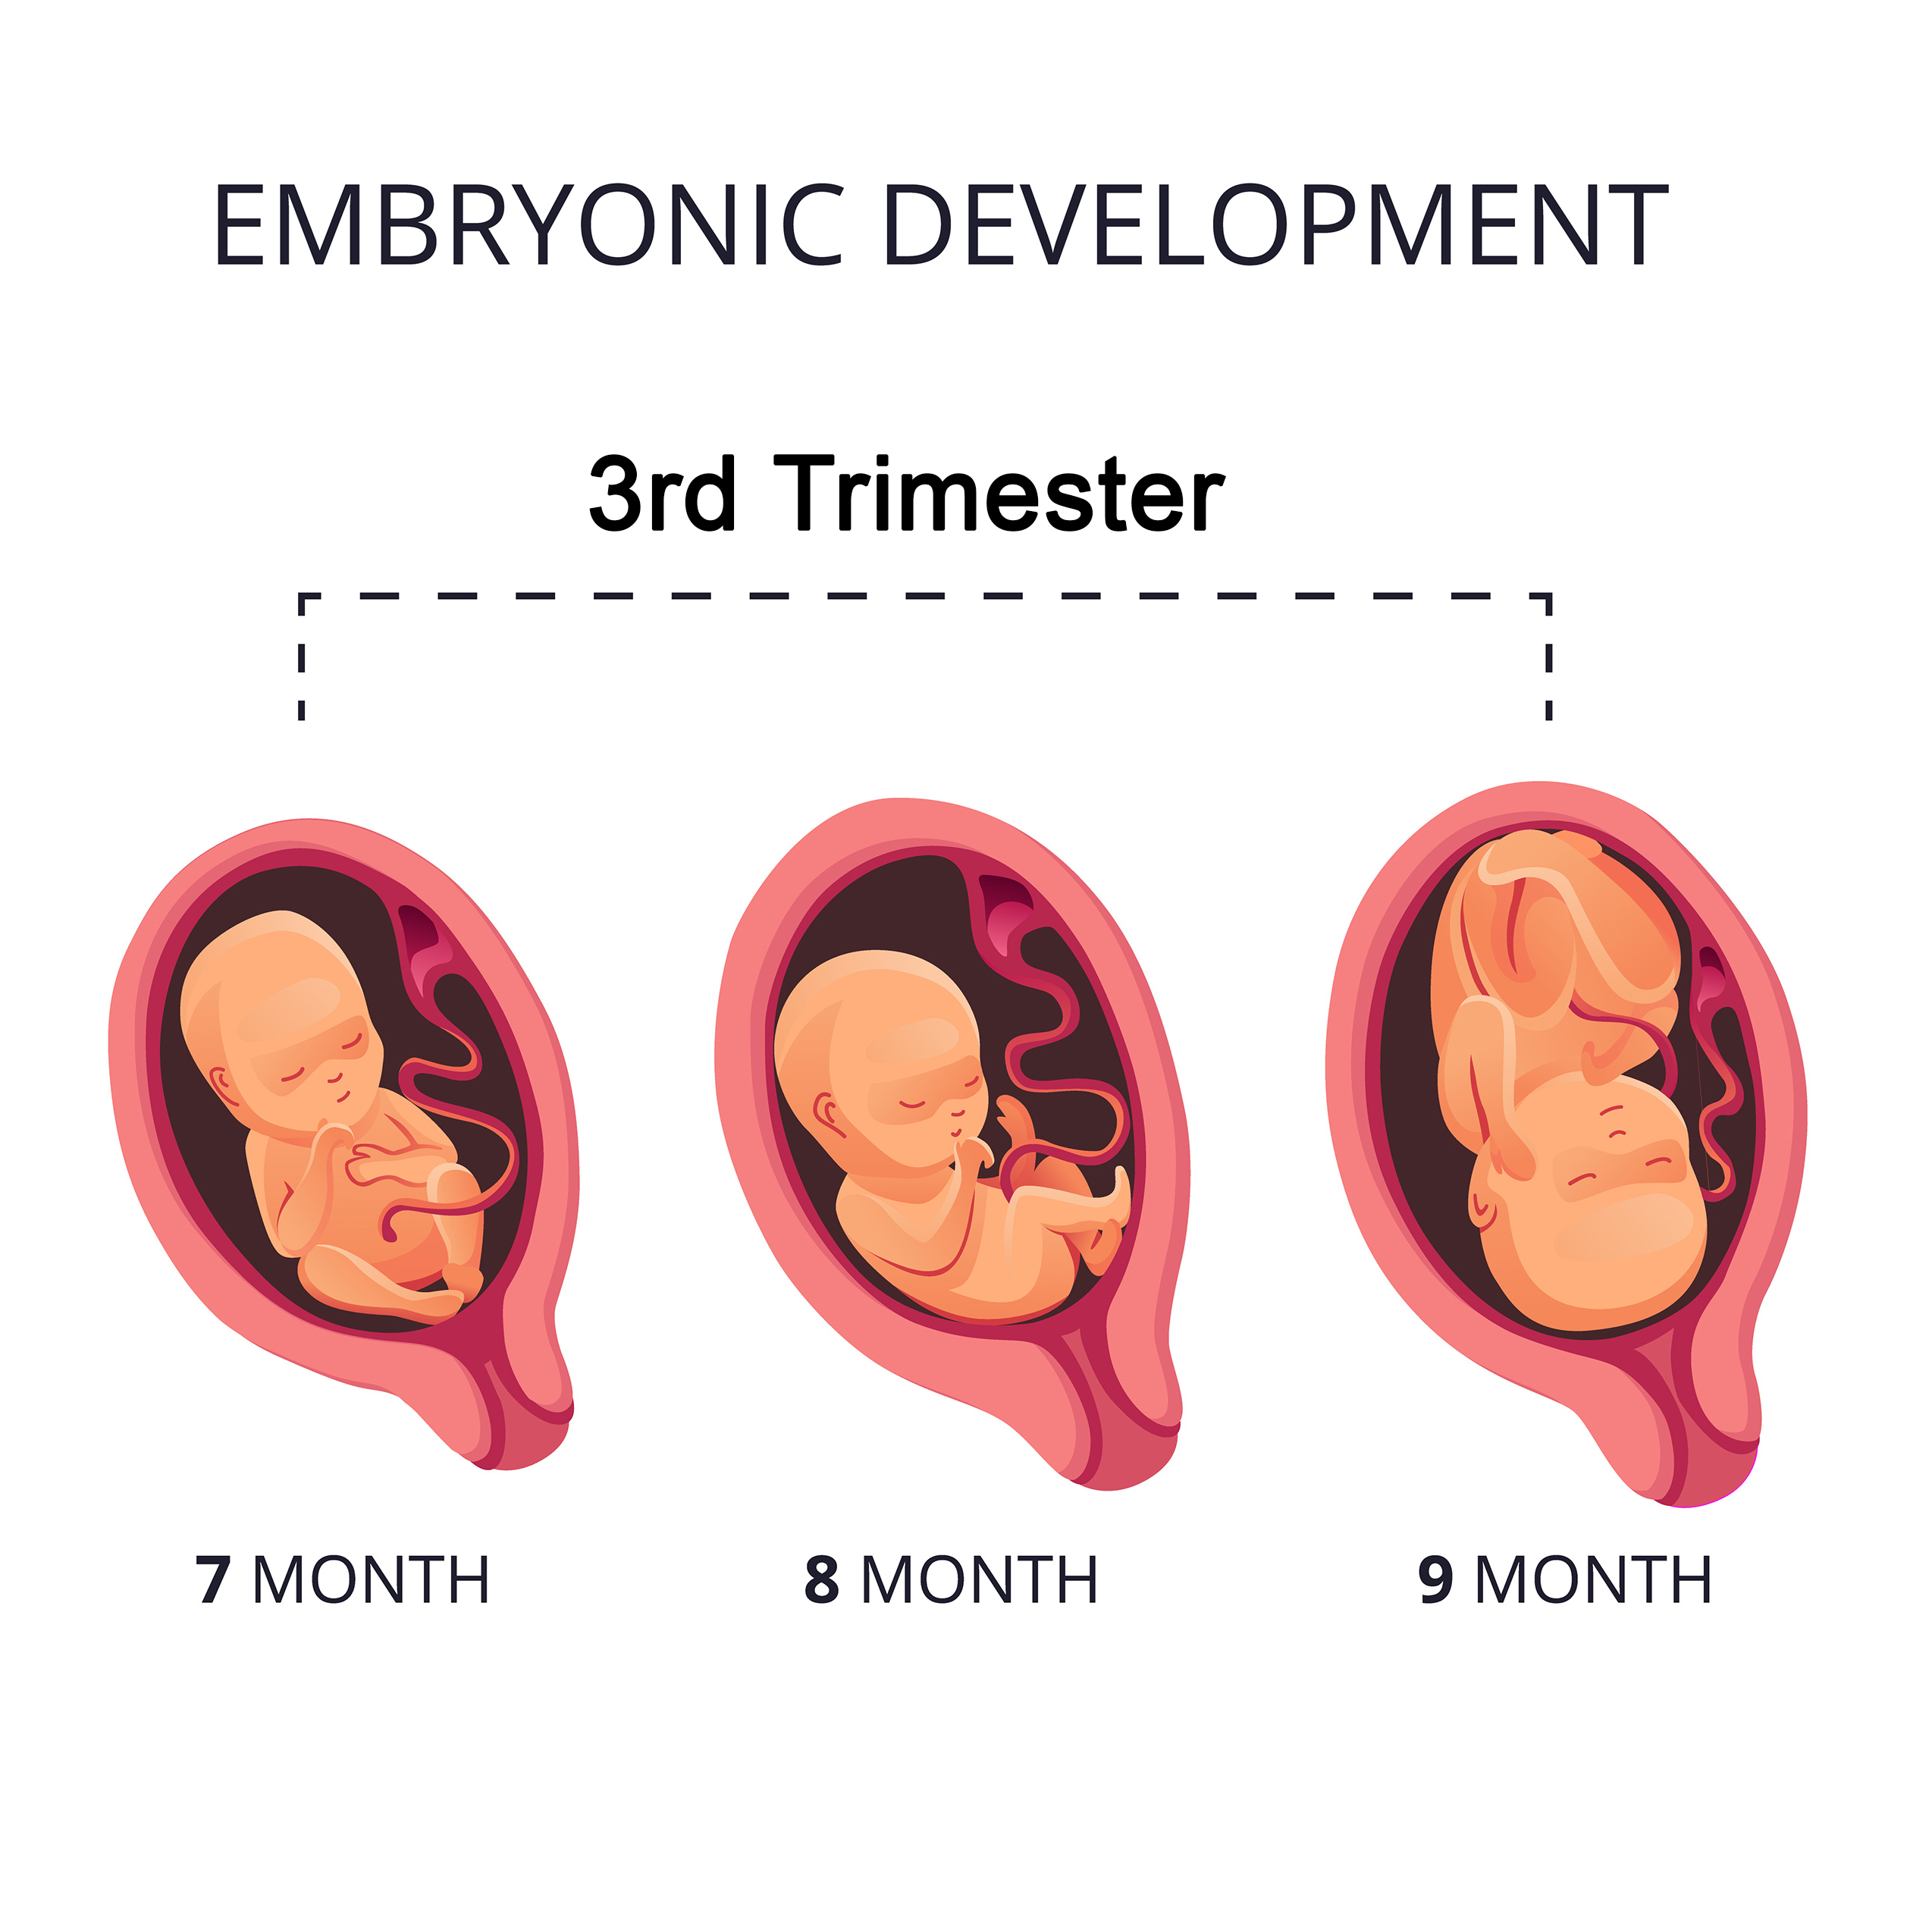 My Pregnancy: Third Trimester, Almost There!